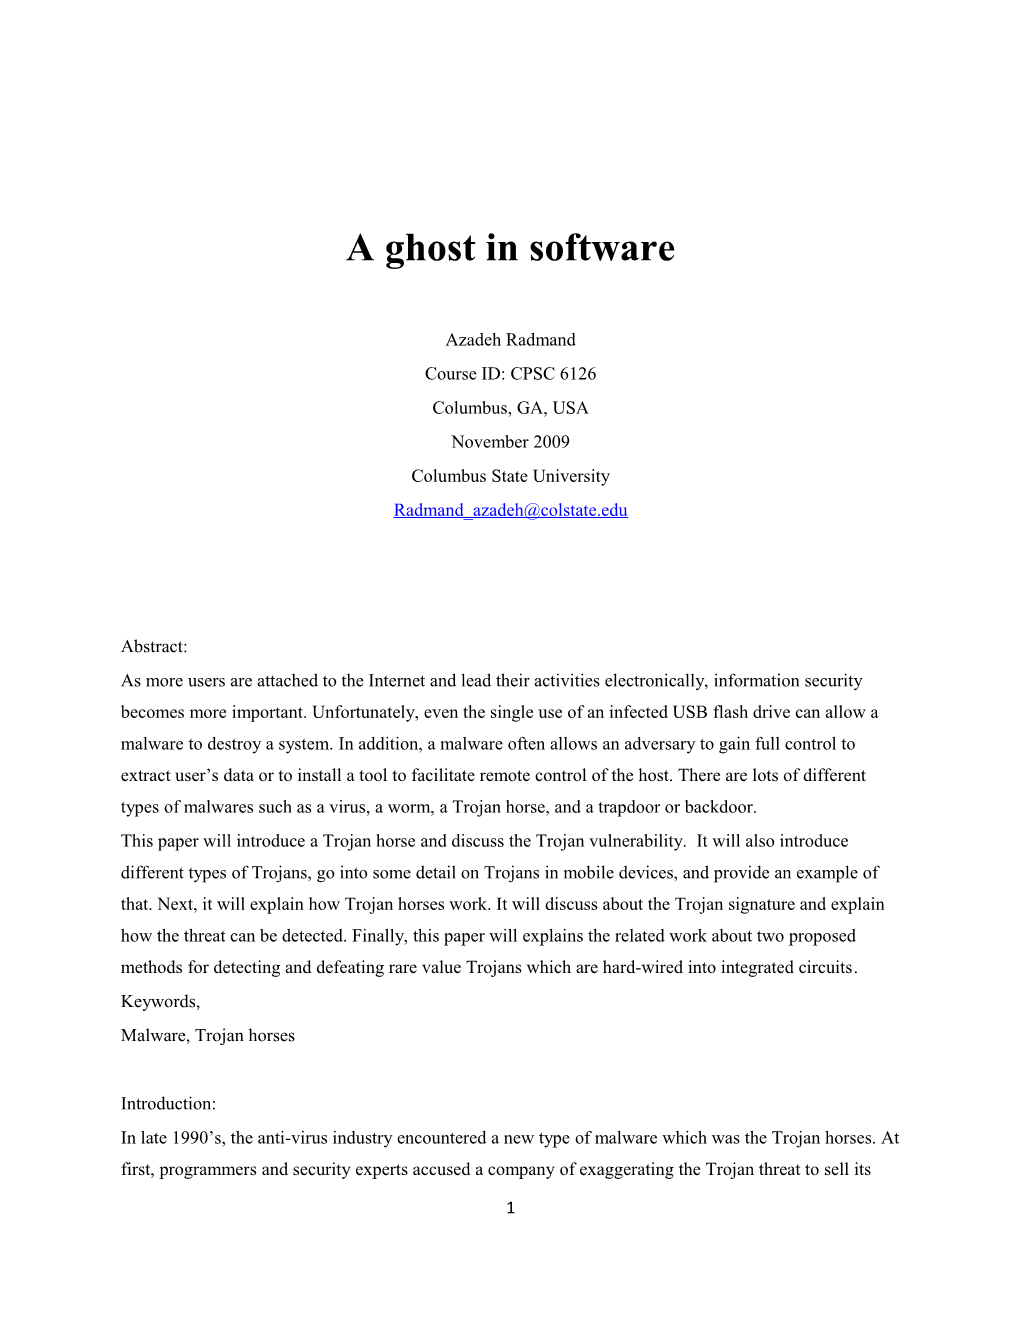 A Ghost in Software